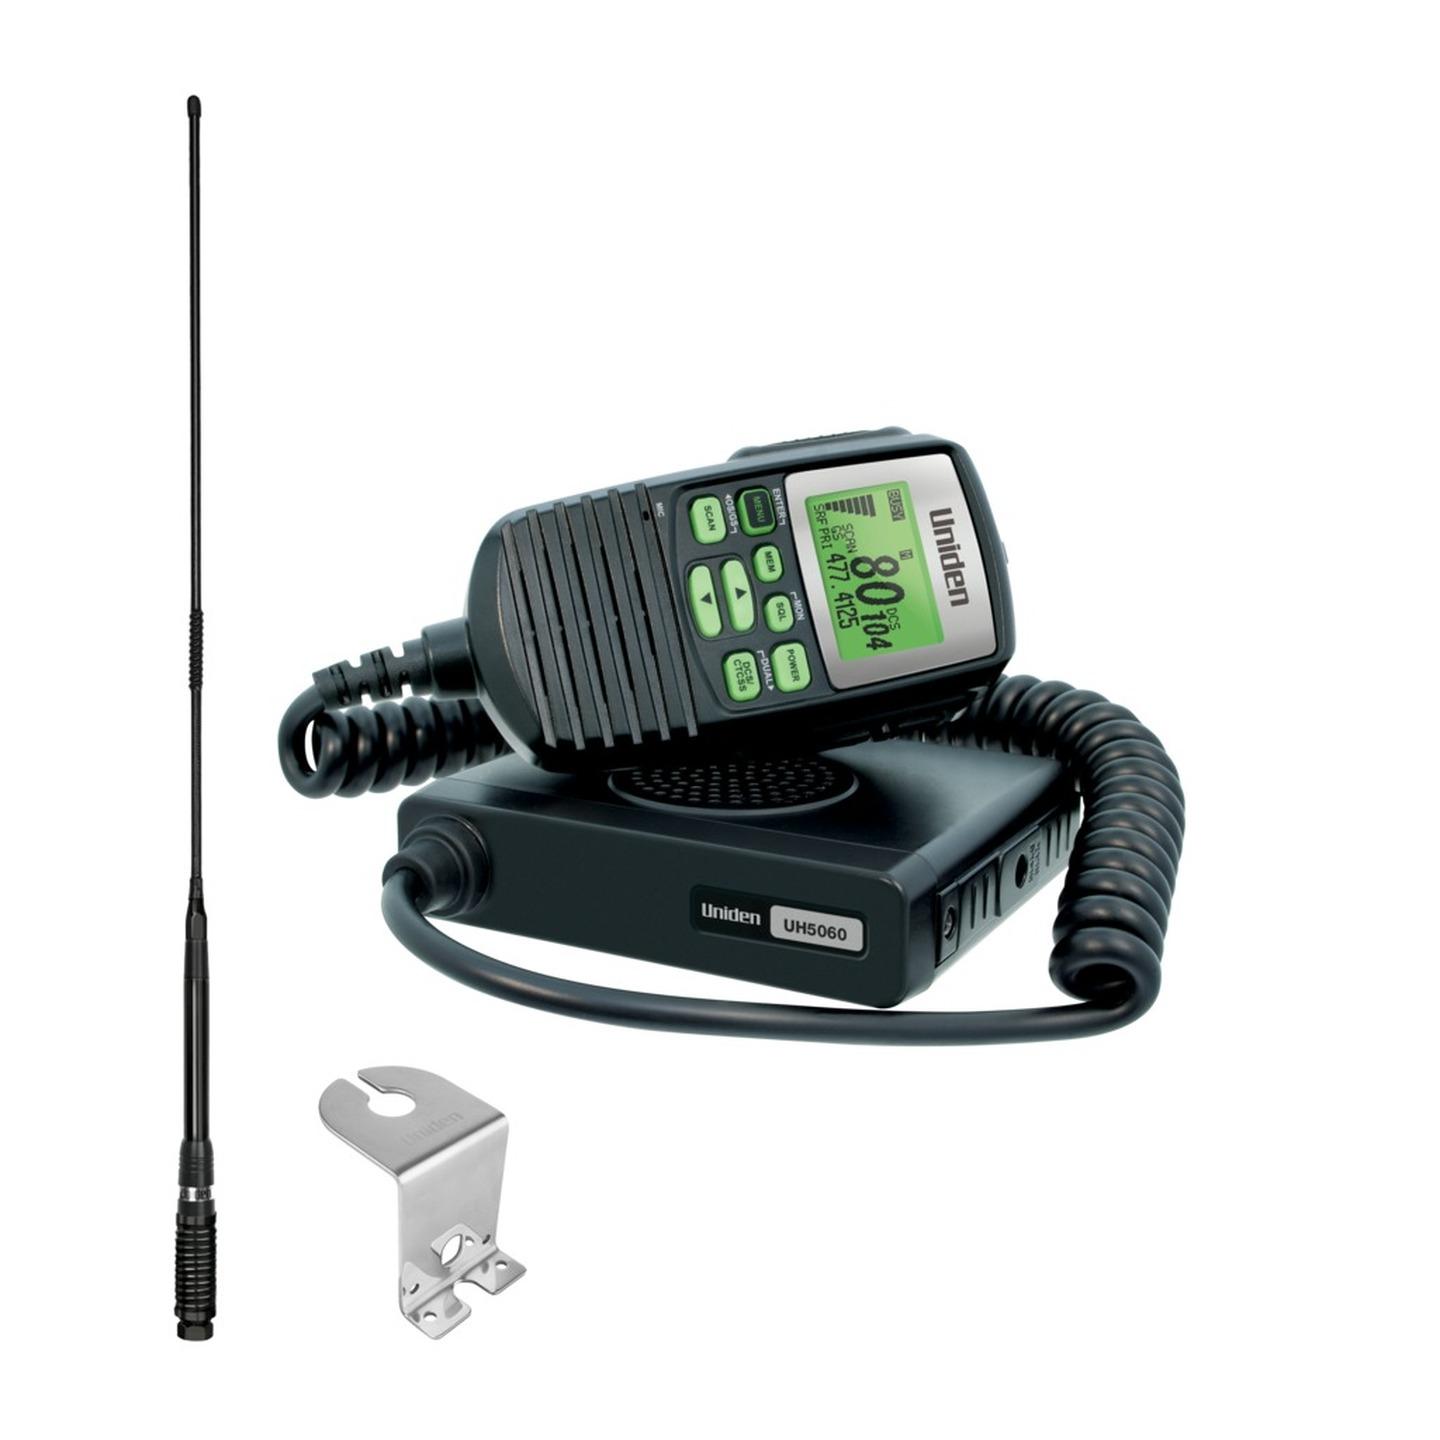 Uniden 5W UHF CB Mobile Transceiver Mic and Antenna Pack UH5060VP